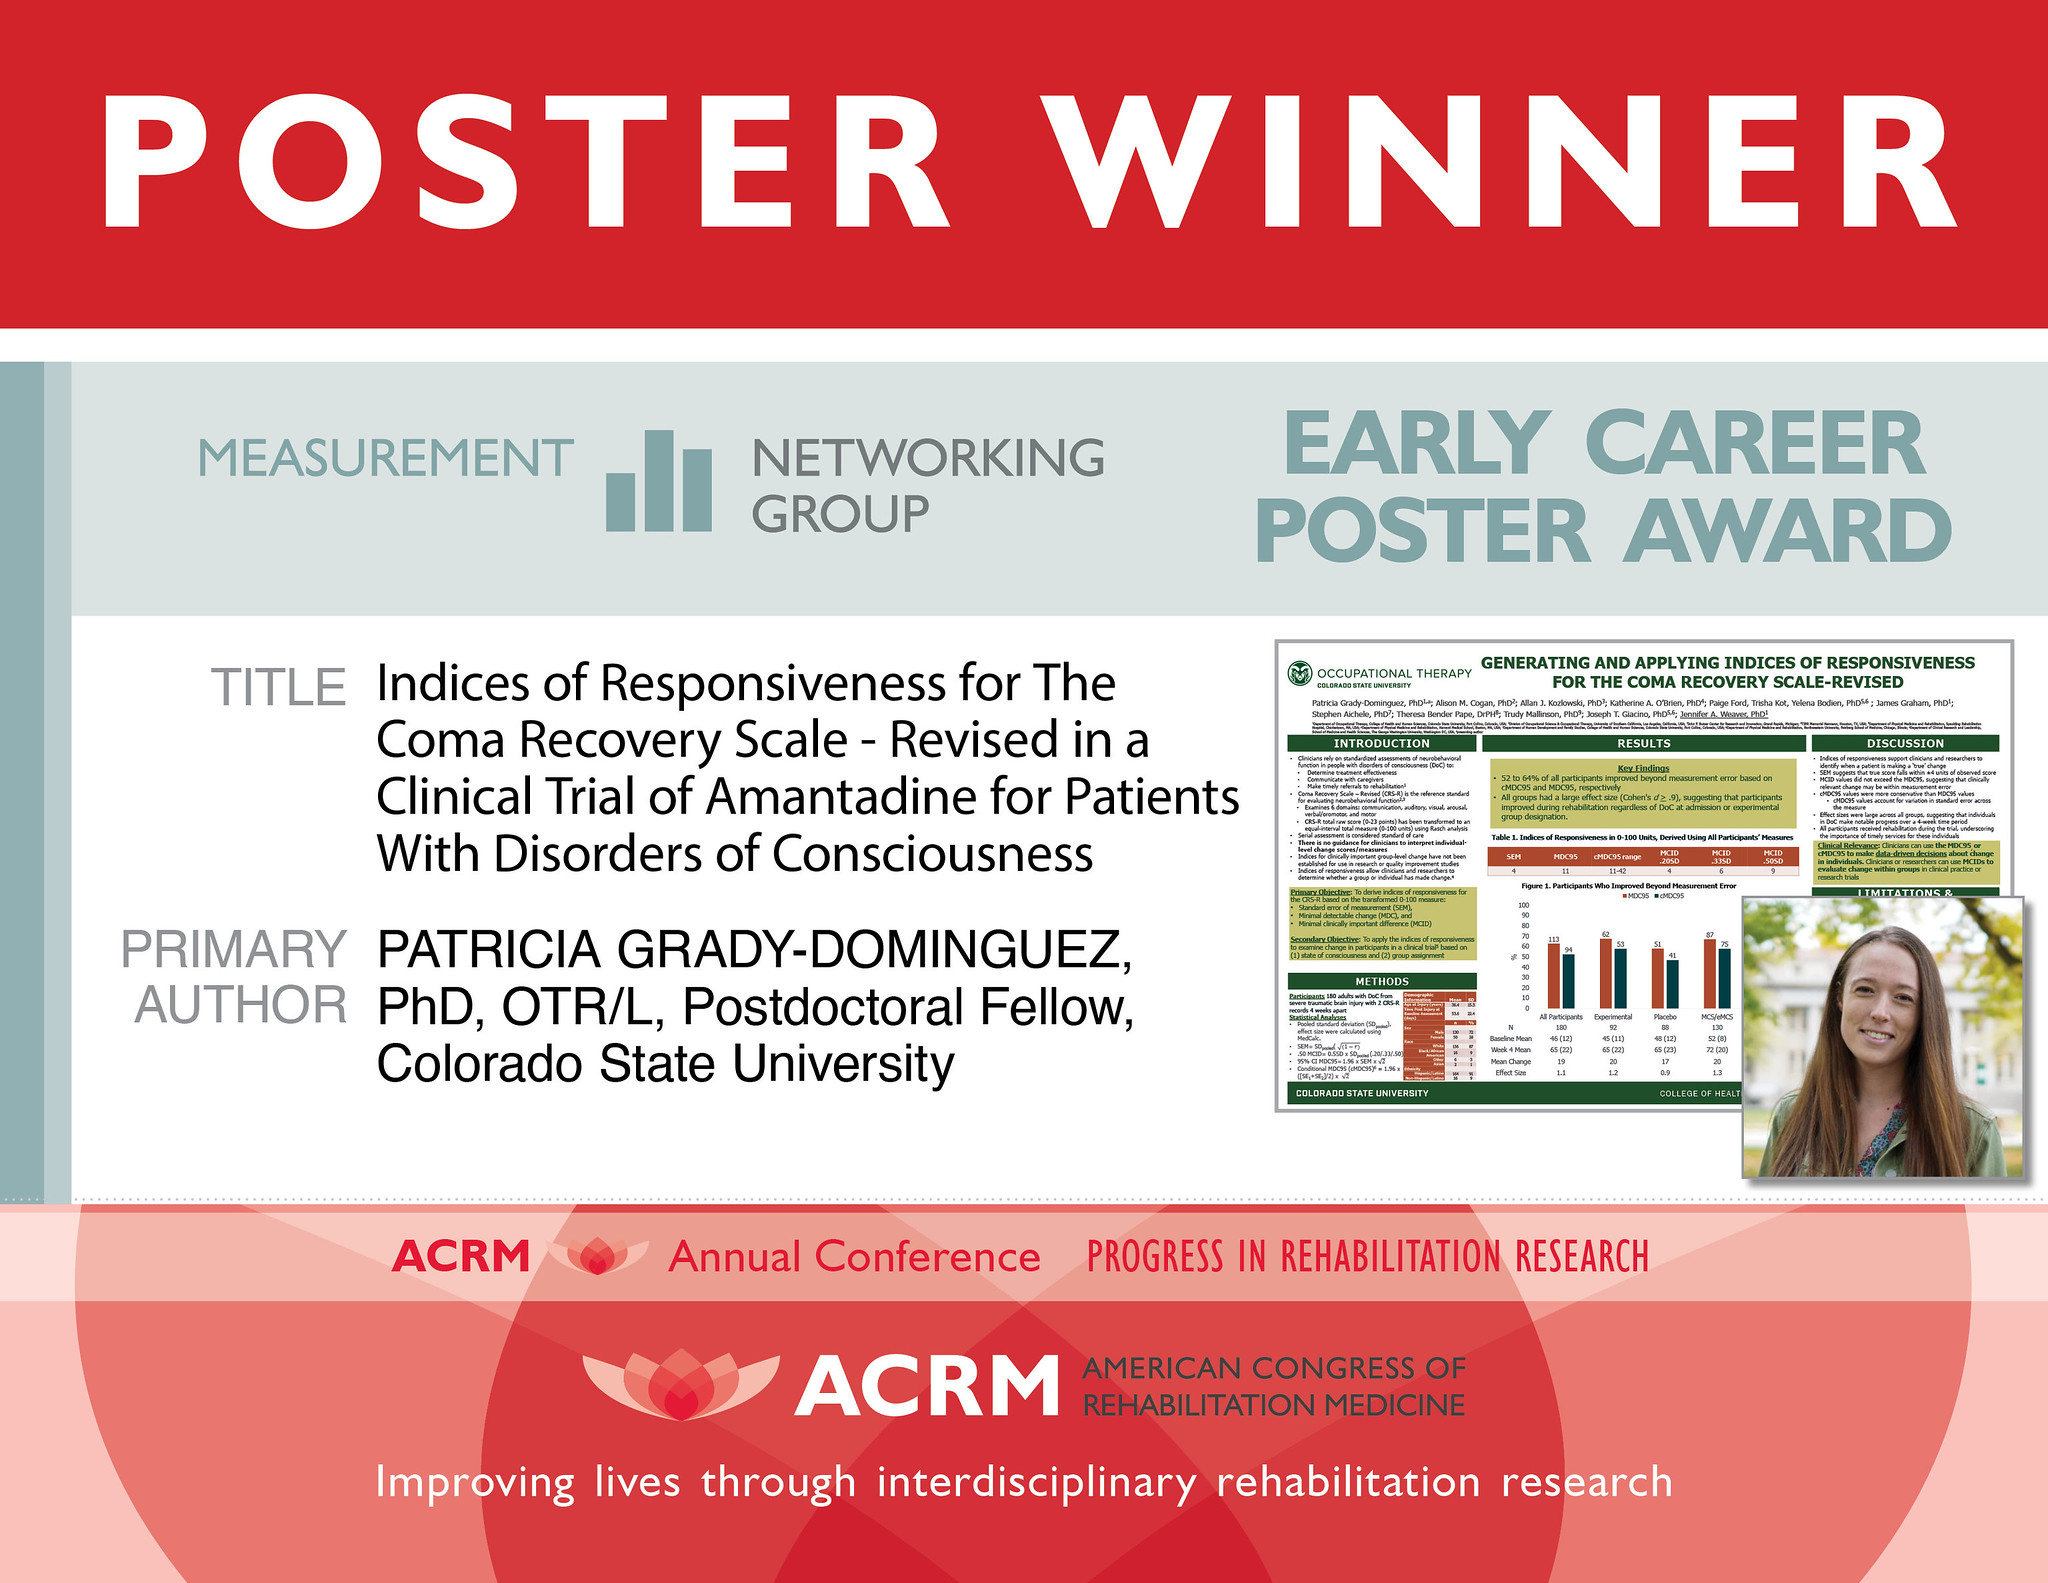 Measurement ISIG Early Career Poster Award